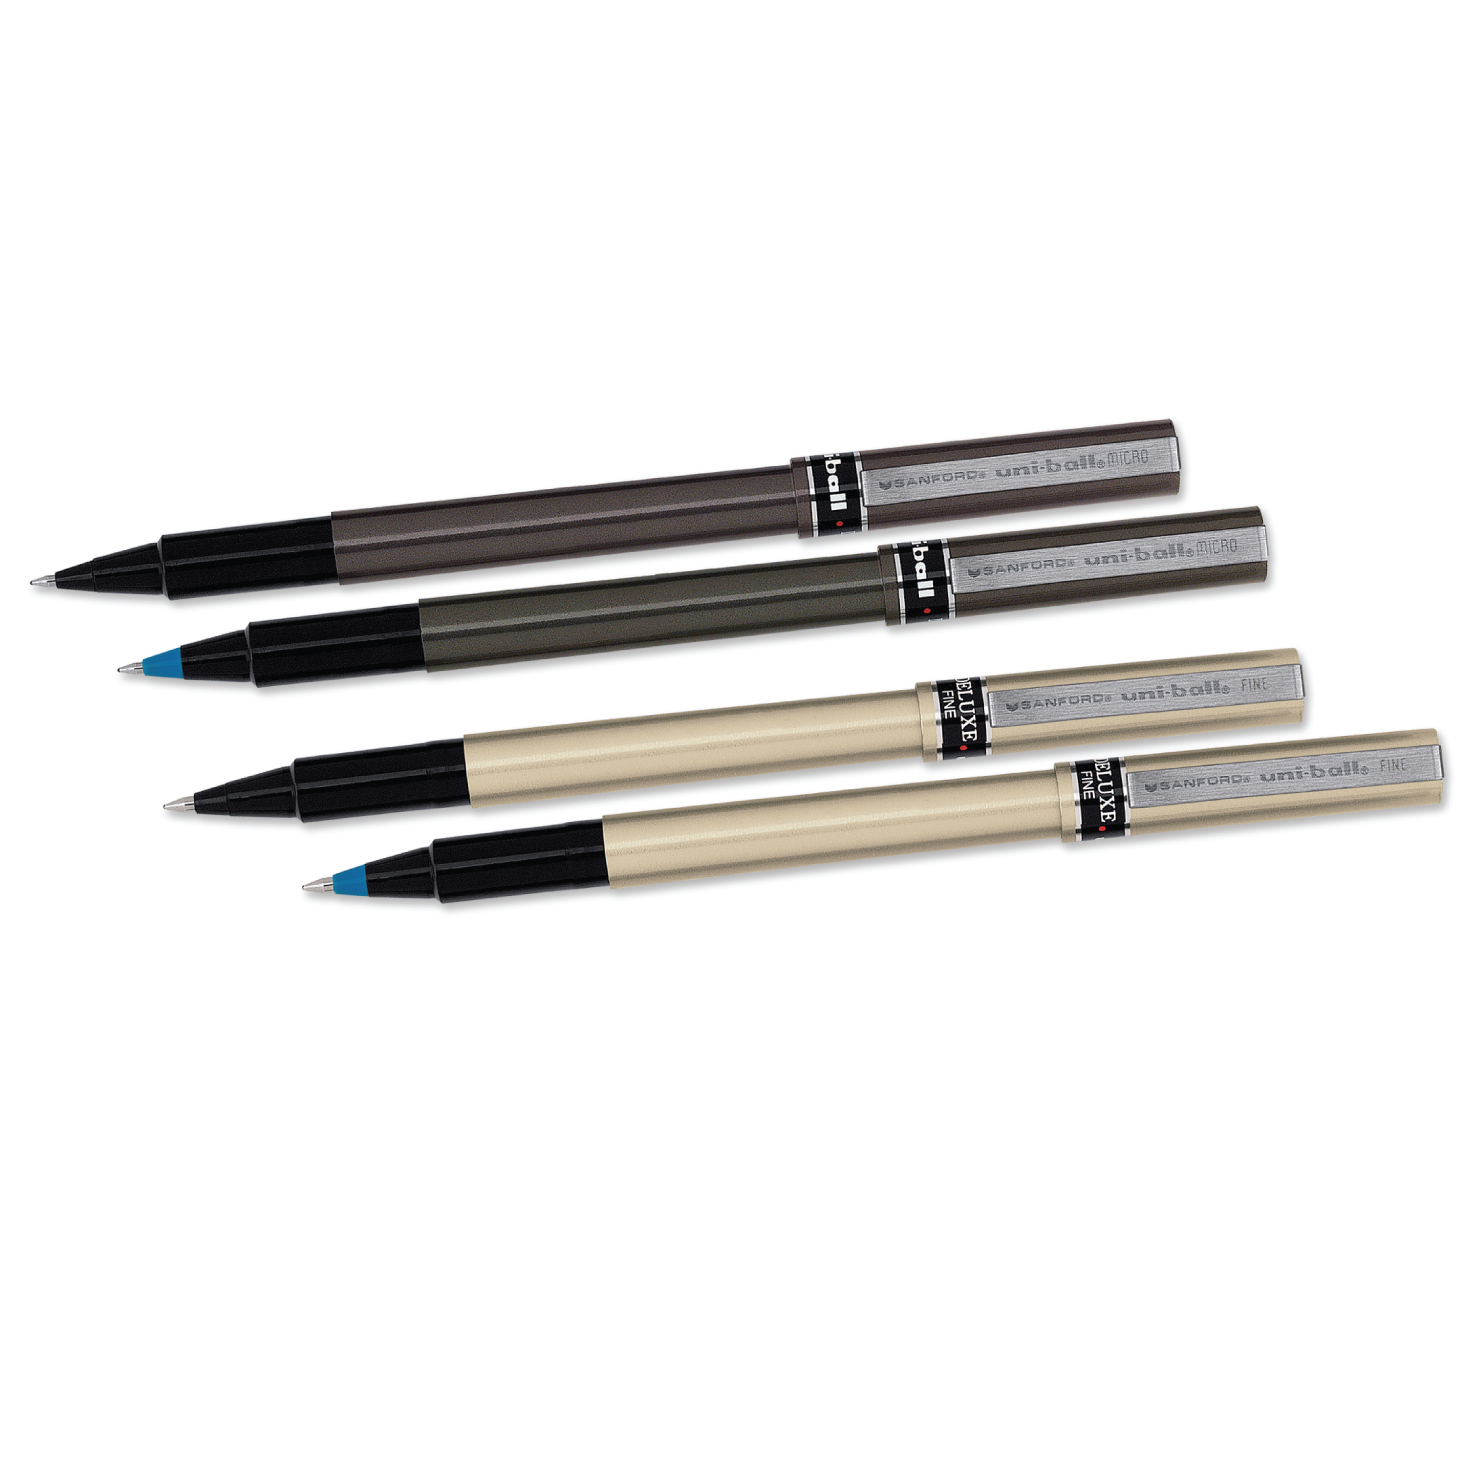 Promotional Uniball Eye Micro Liquid Ink Rollerball Pens can be used f